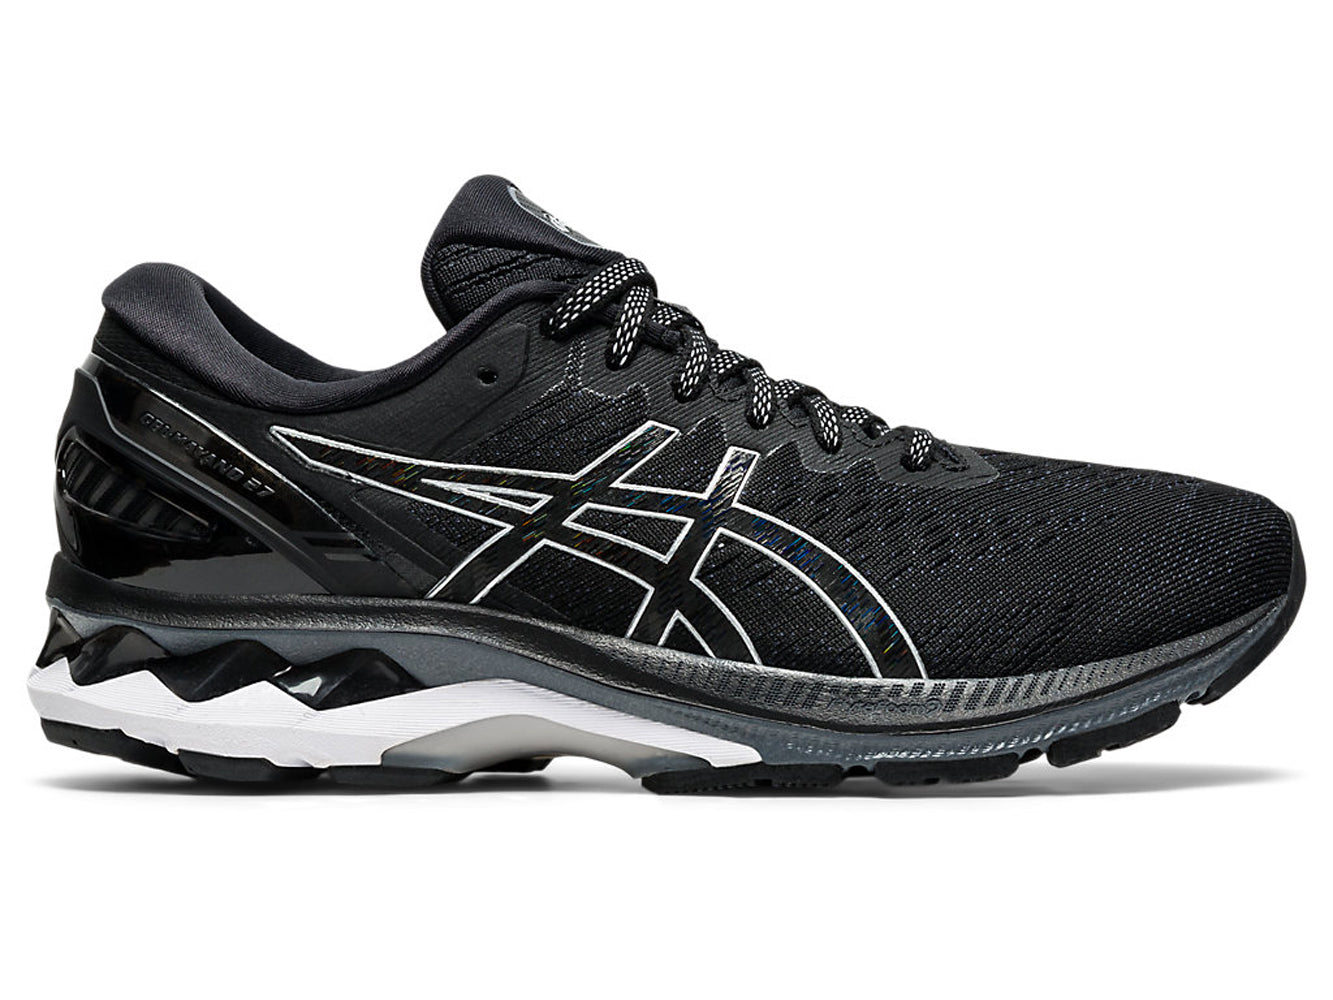 Women's Asics GEL-Kayano 27 Running Shoe in Black/Pure Silver from the side